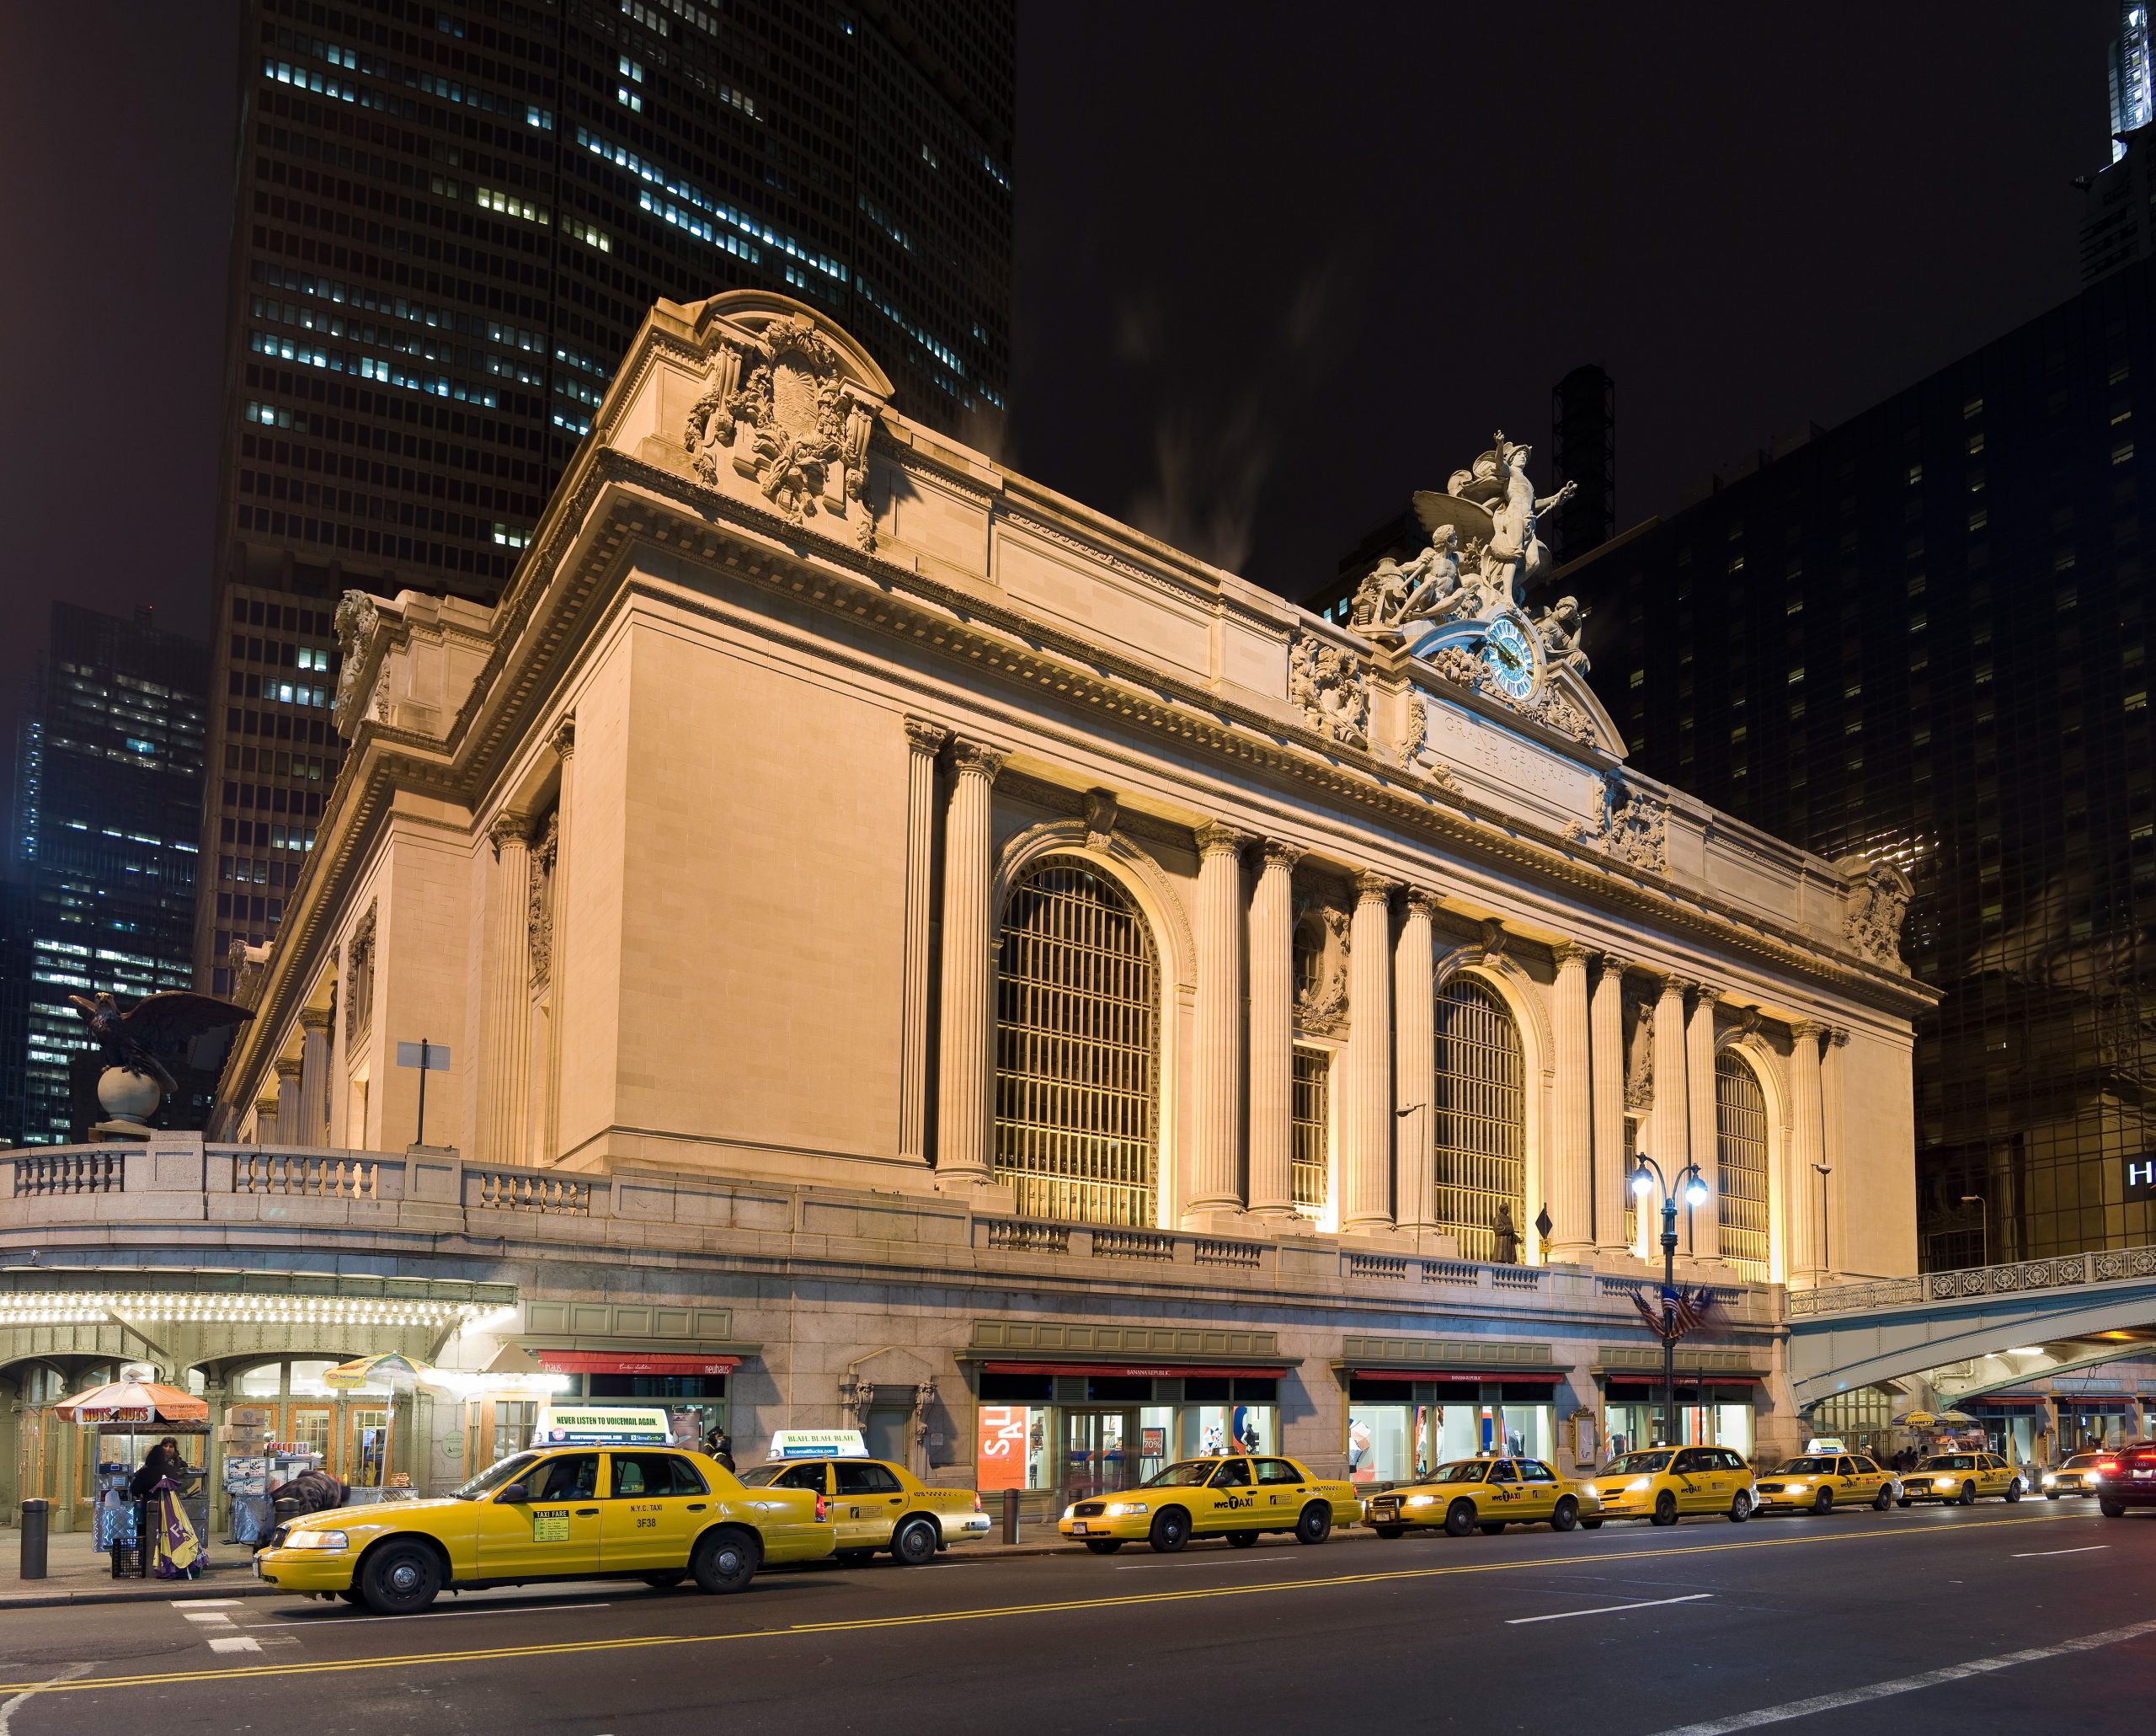 Exterior of the Grand Central Terminal building